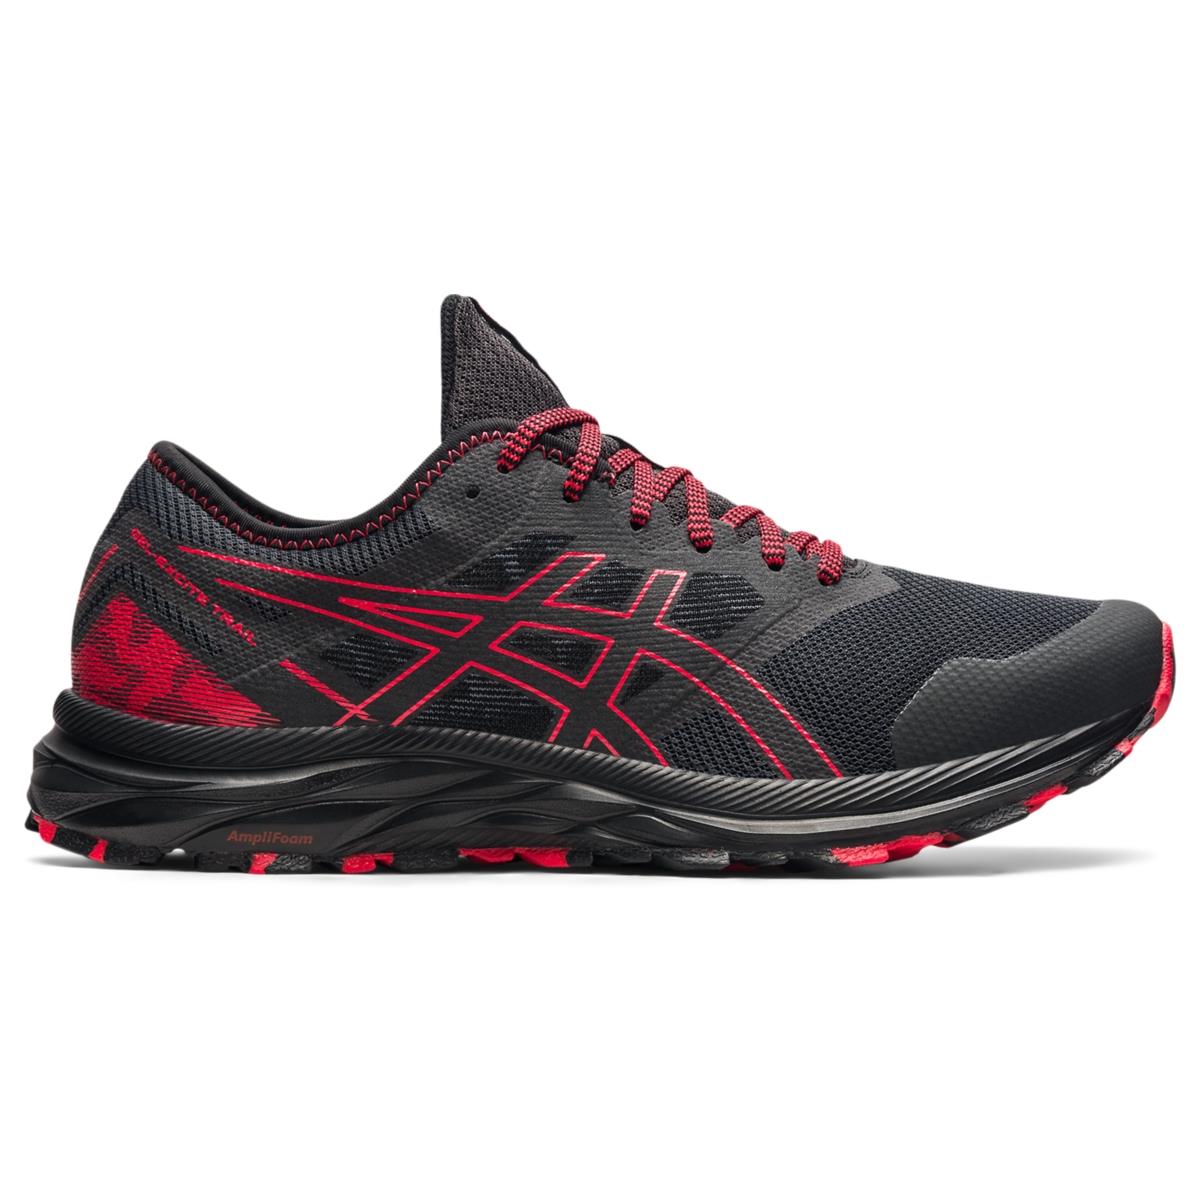 Asics Men`s Gel-excite Trail Running Shoes 1011B194 GRAPHITE GREY/ELECTRIC RED